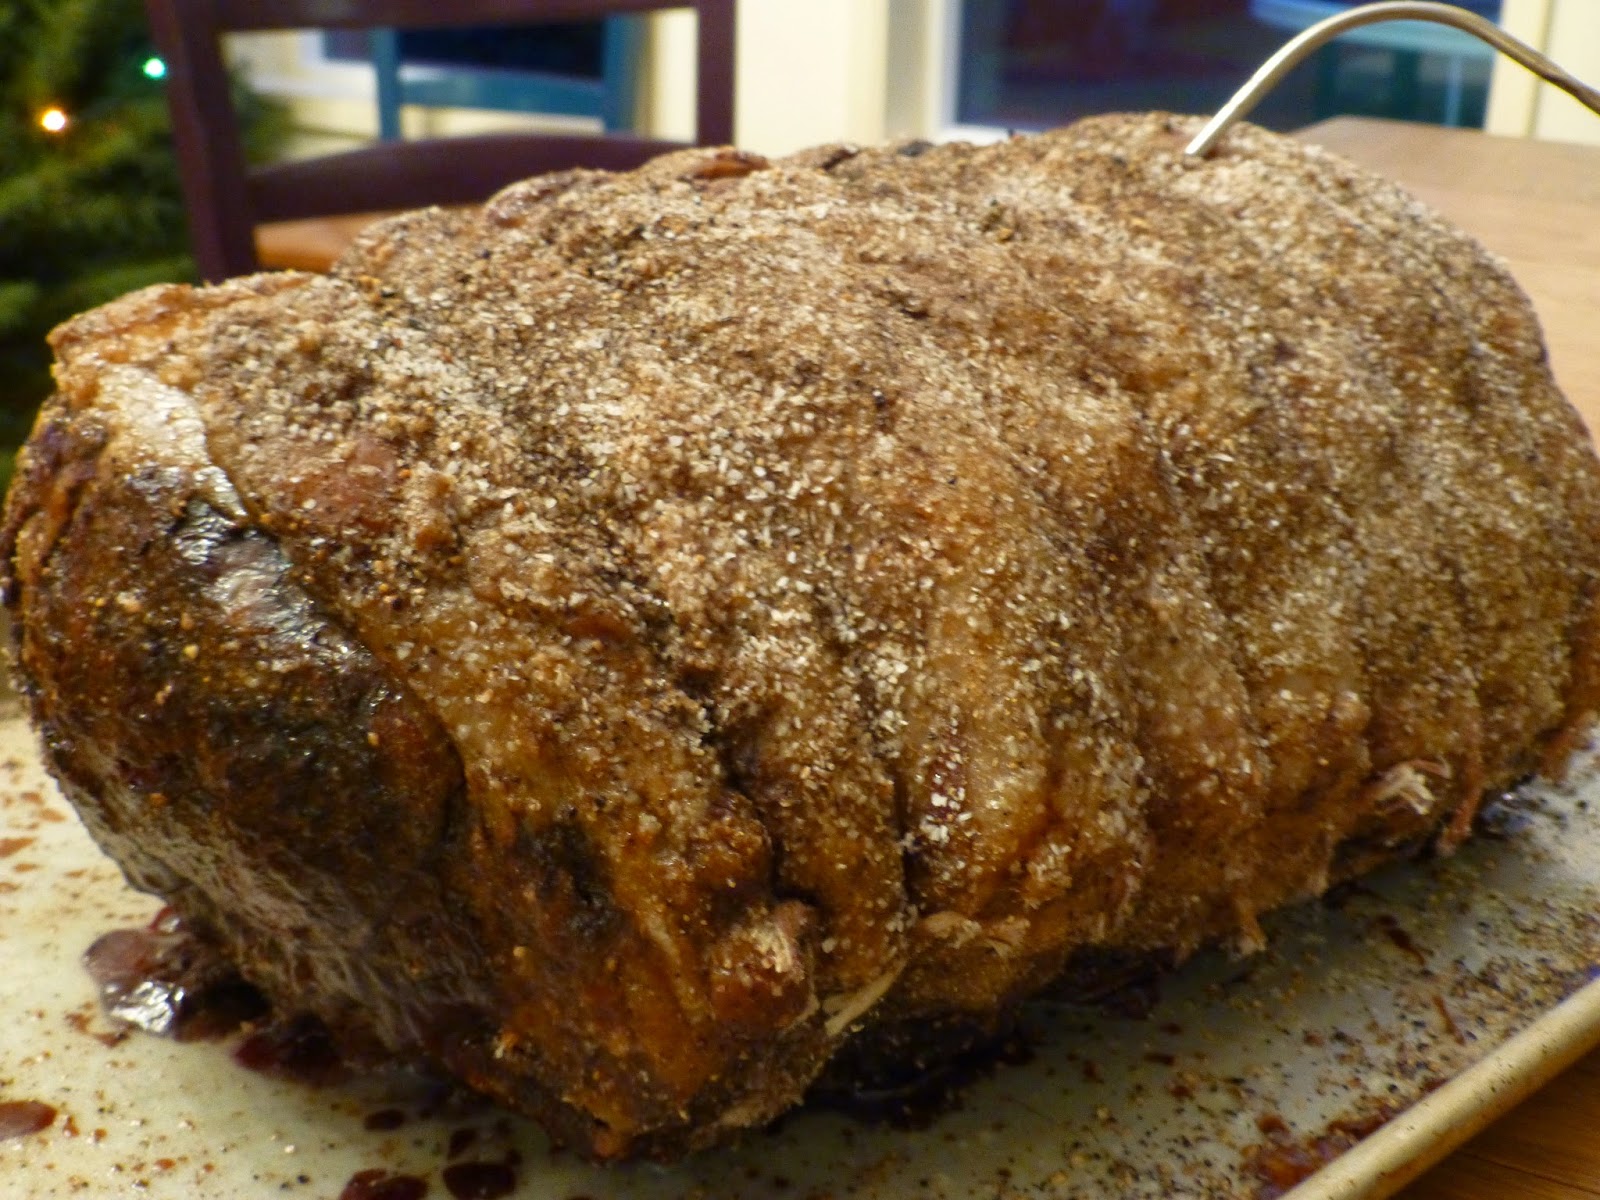 Prime Rib At 250 Degrees - Traeger Prime Rib Roast | Or Whatever You Do : It seems too low, but ...